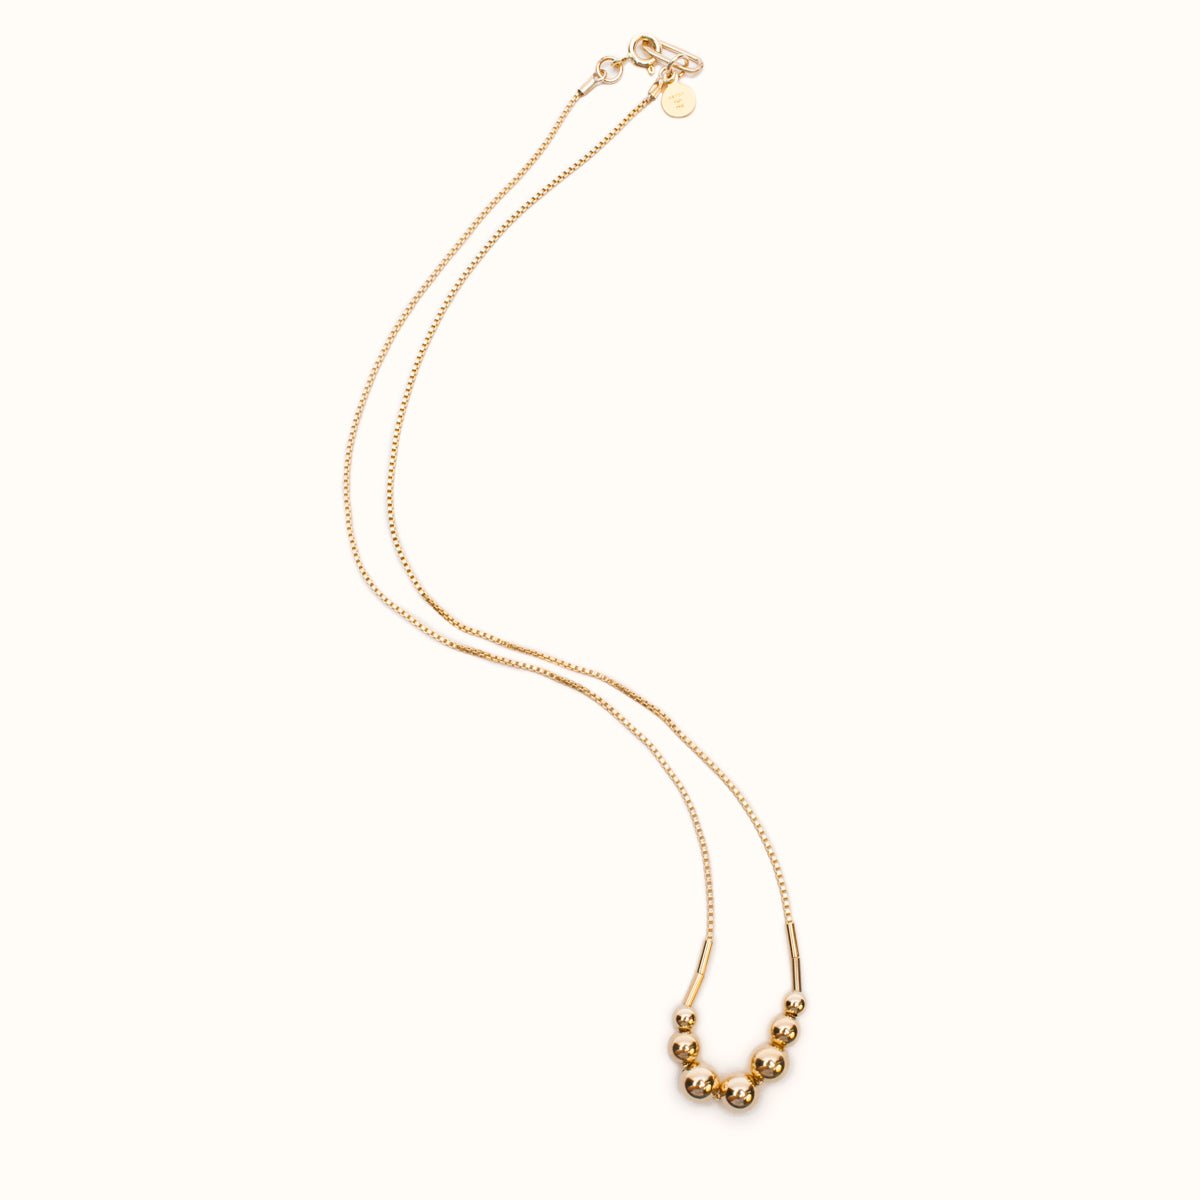 A gold fill necklace featuring a delicate chain and seven round beads flanked by narrow tube beads. The Strella Necklace is designed and handcrafted in Portland, Oregon.